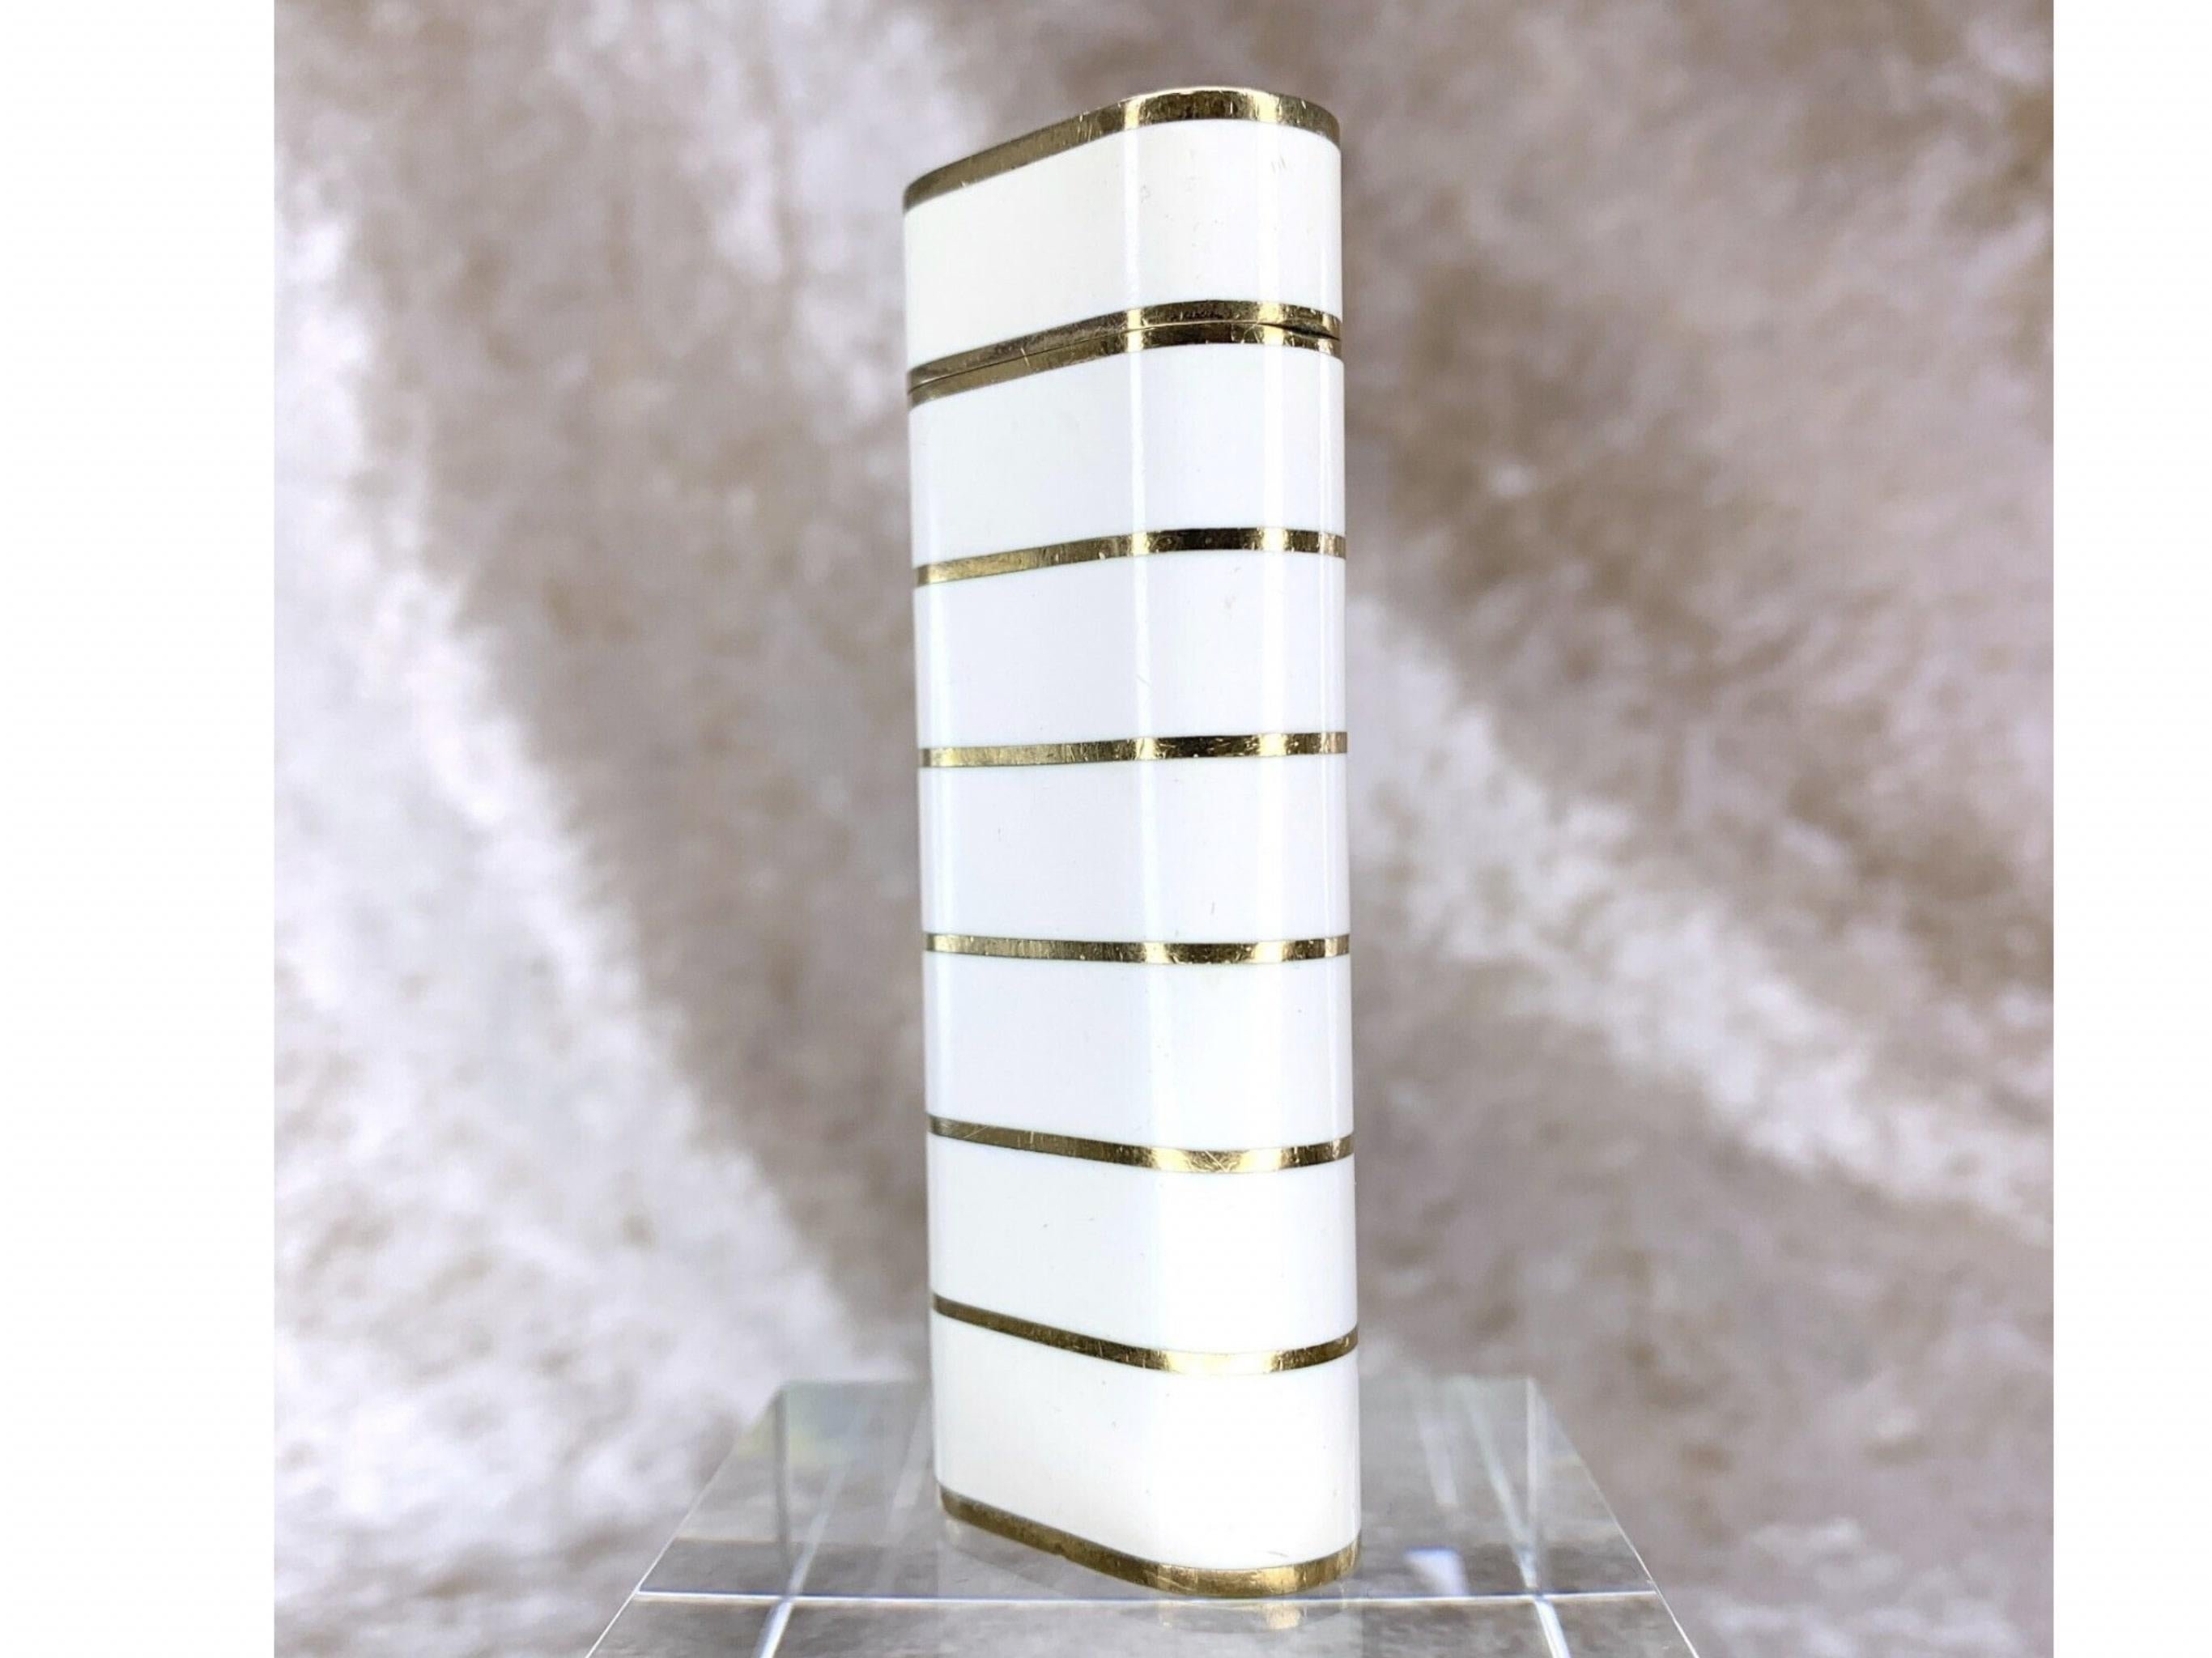 Beautiful and Very Rare Vintage Cartier Lighter in White Lacquer 
Gold Plated Horizontal Gold Stripes 
Le Must De Cartier 
Circa 2000
In mint working condition
The lighter sparks, ignites and flames 
Comes with Original Cartier Case 
Elegant and